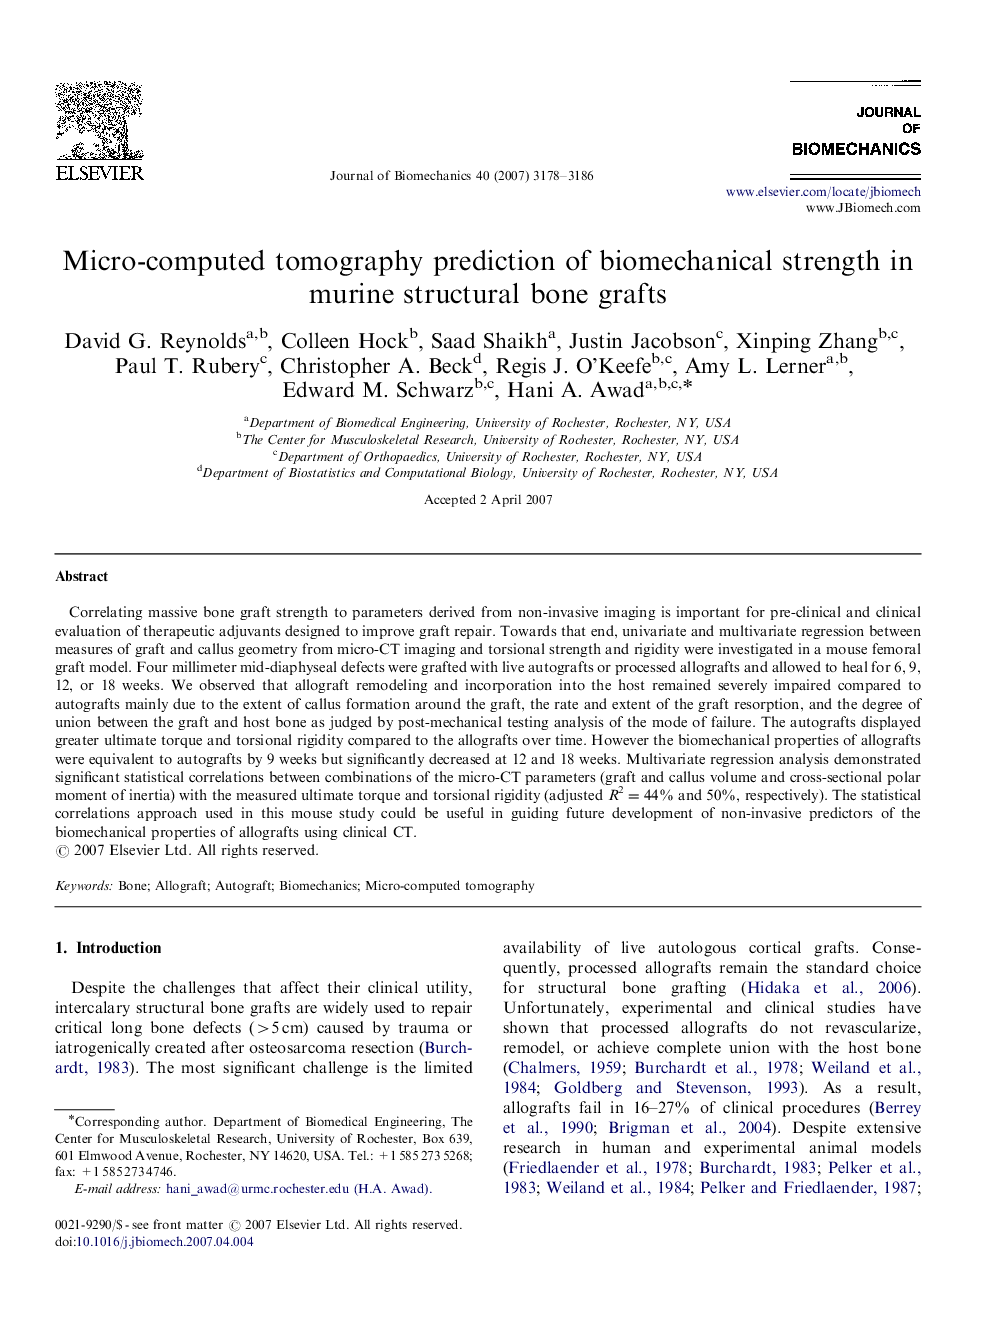 Micro-computed tomography prediction of biomechanical strength in murine structural bone grafts